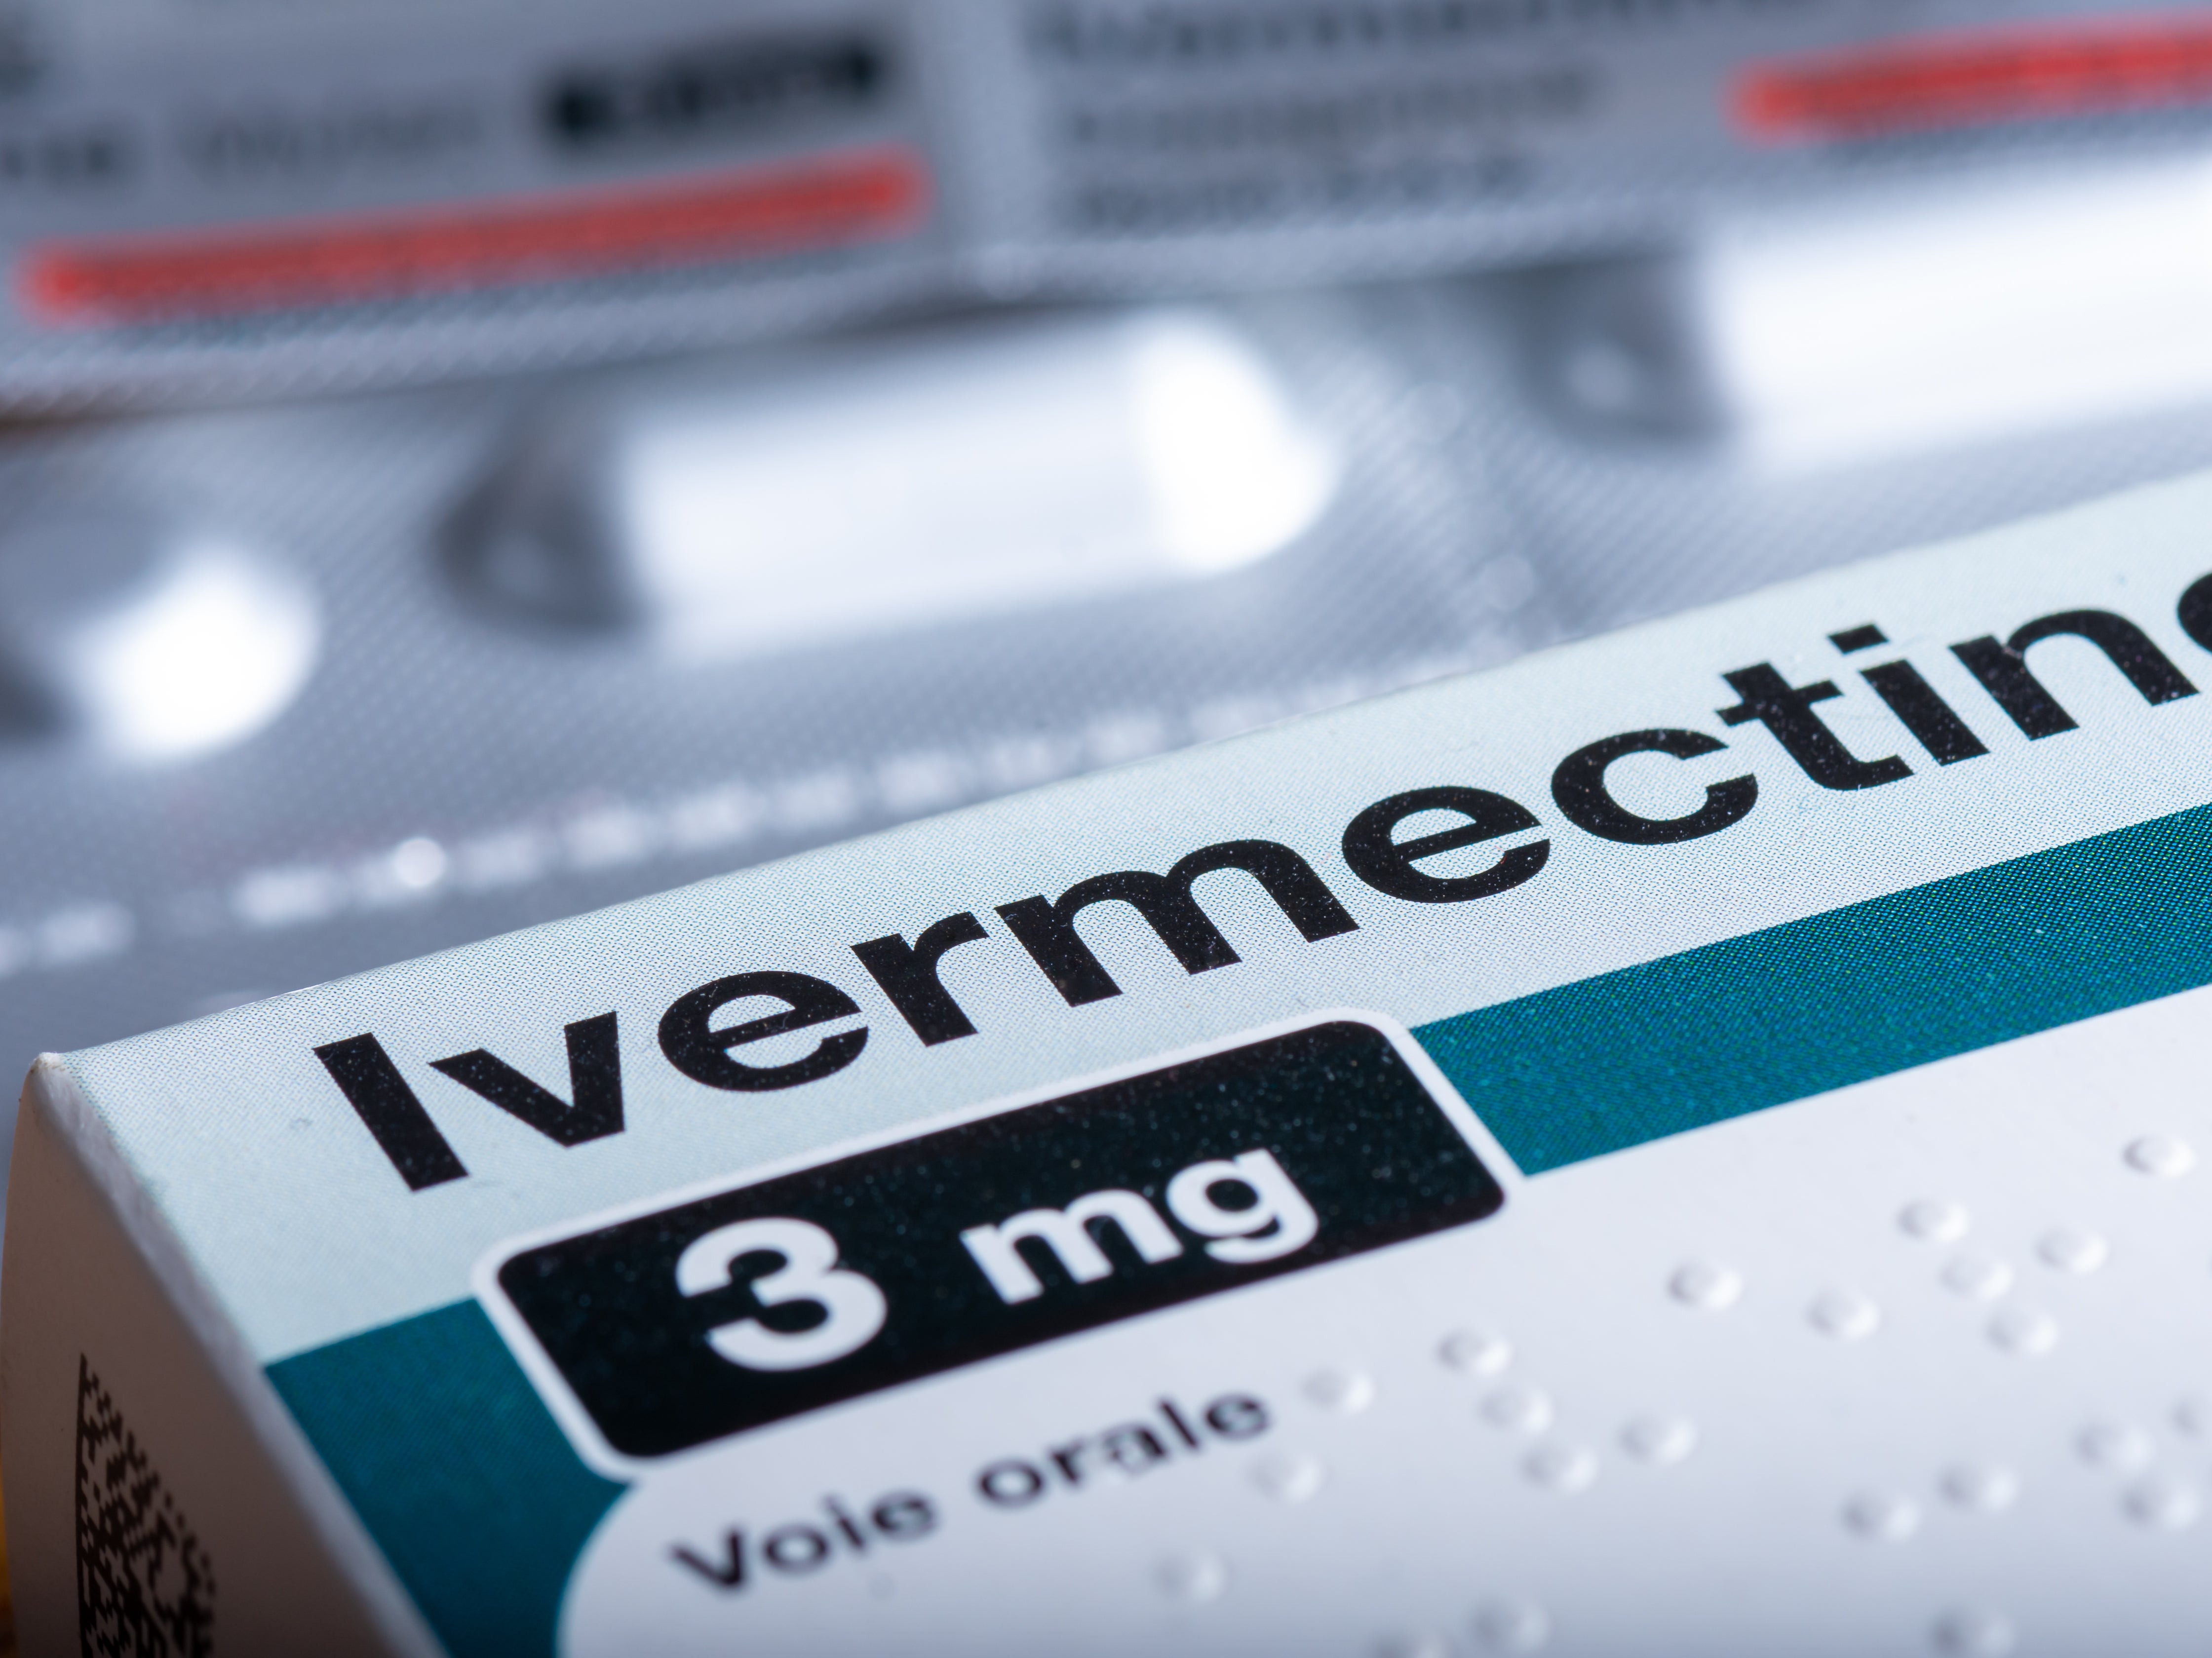 Ivermectin is an anti-parasitic drug often used to de-worm livestock